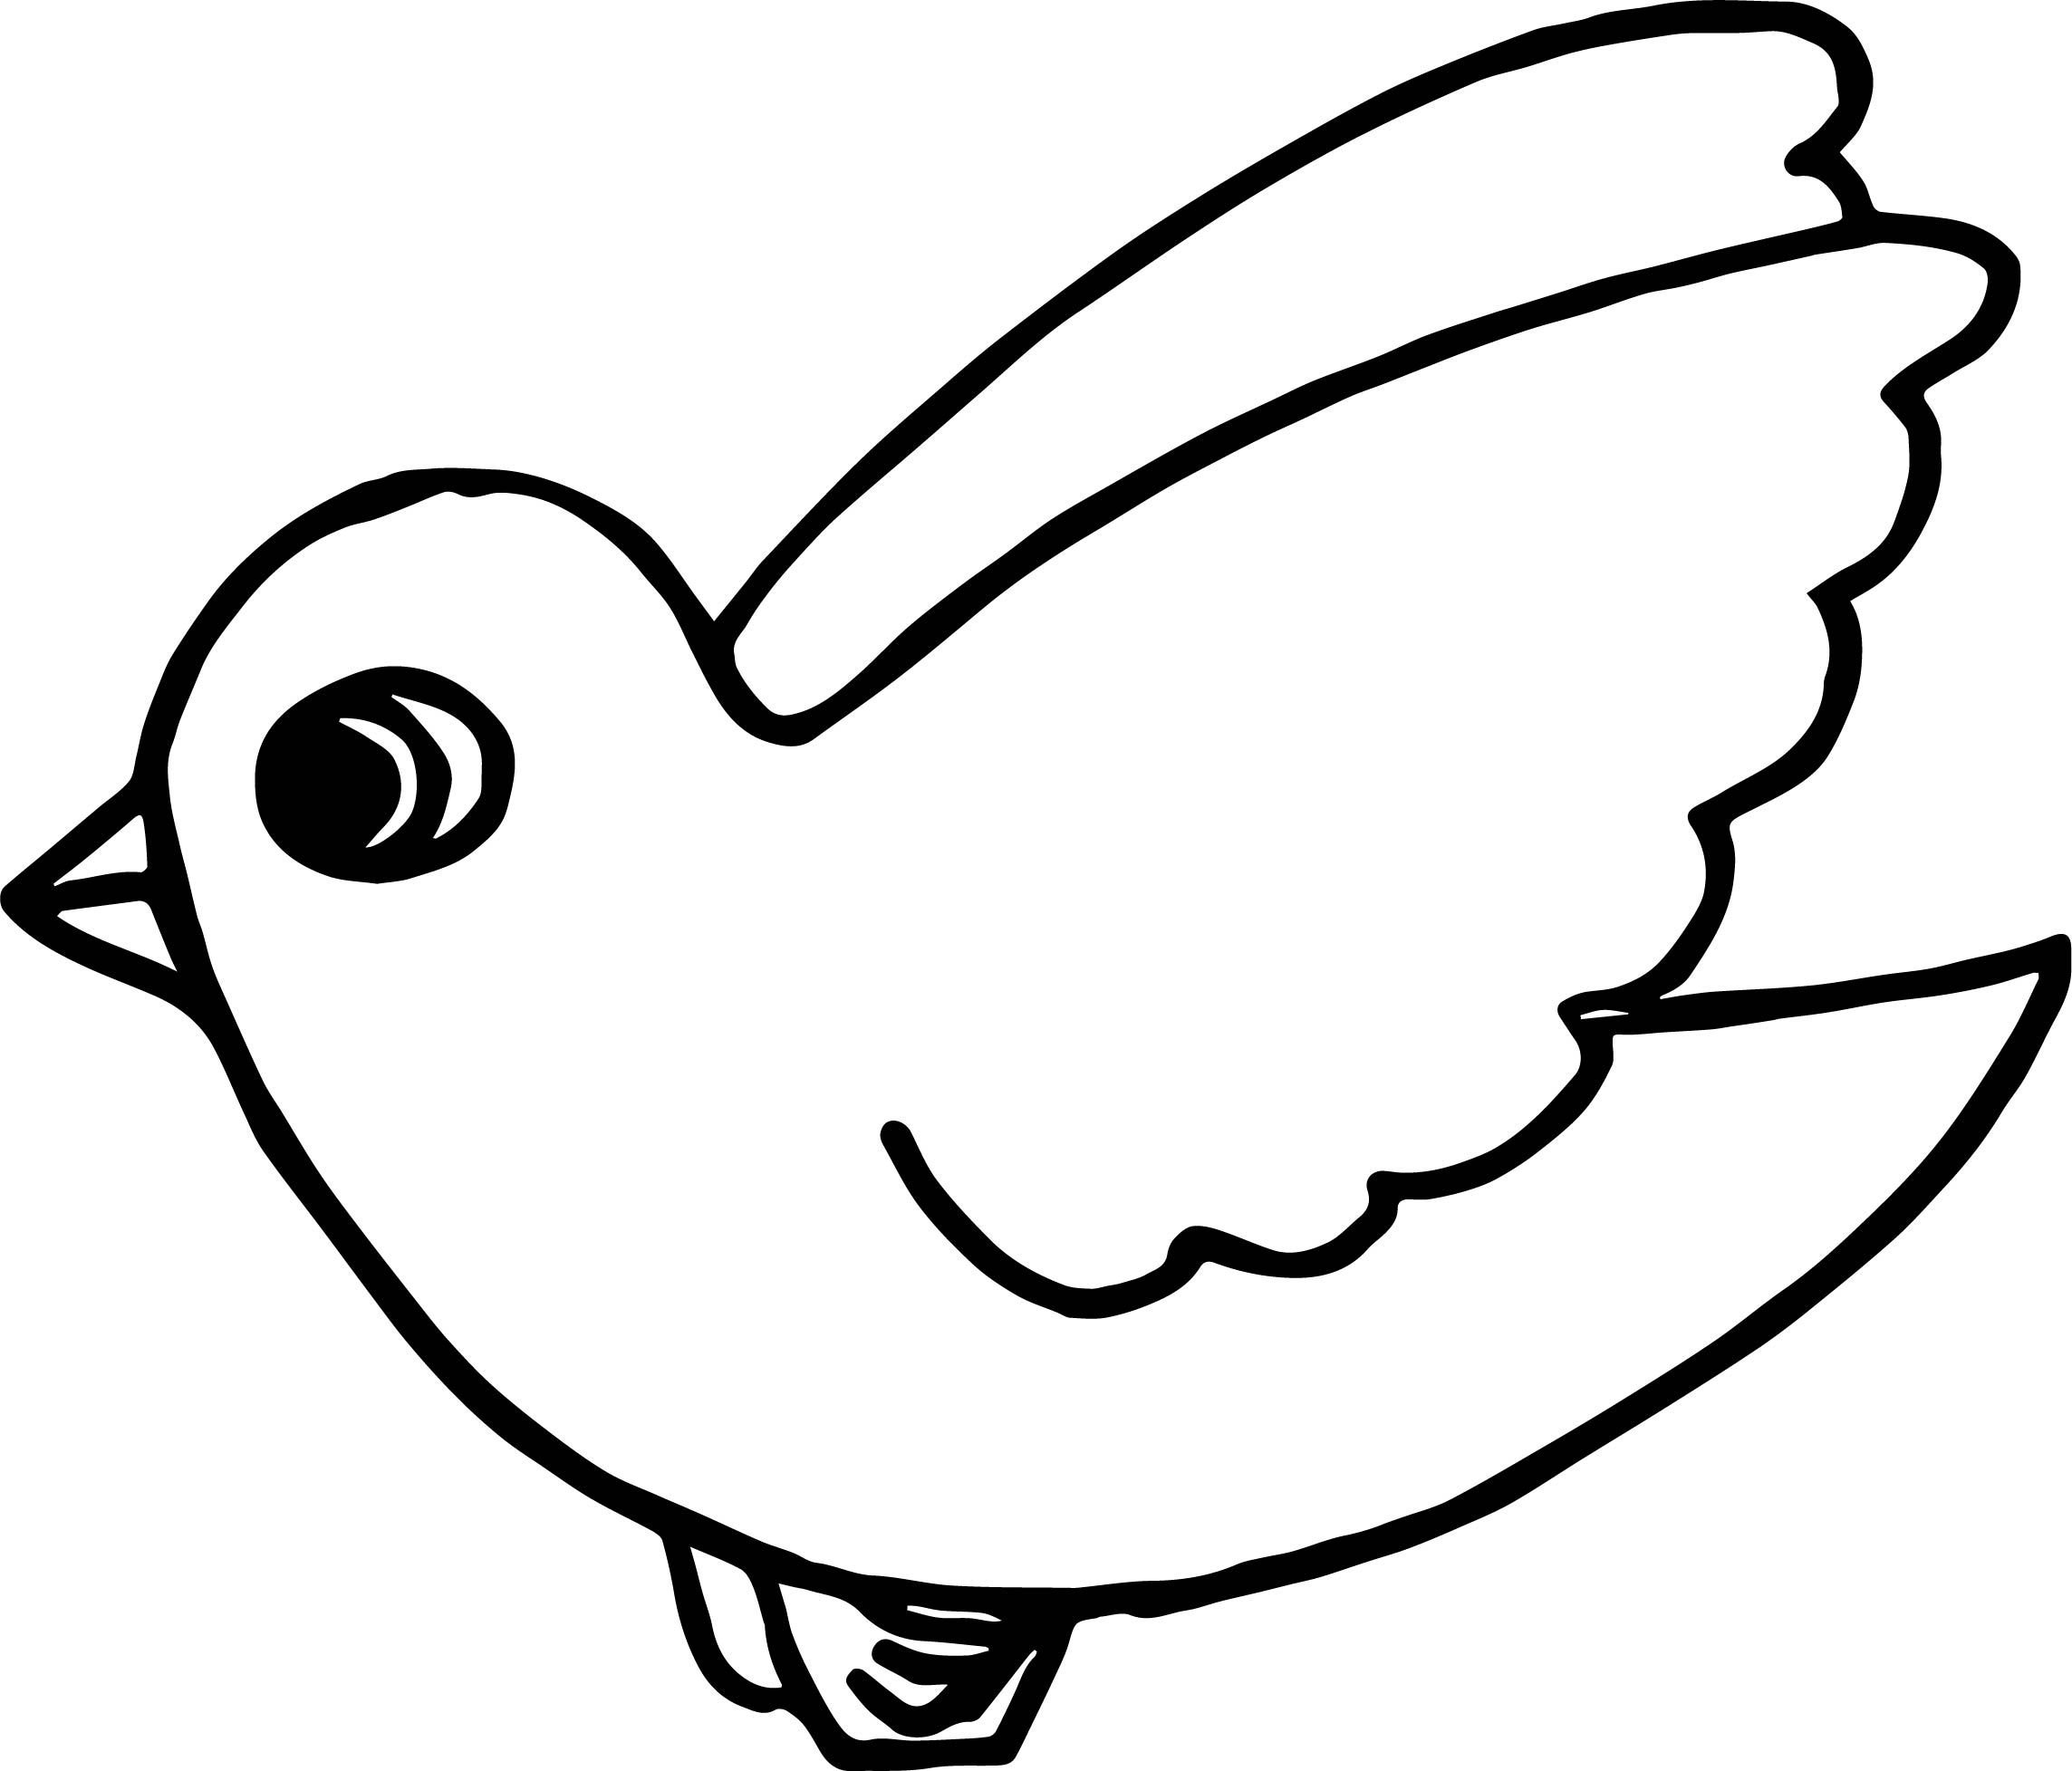 A spectacular bird coloring page for 2-3 year olds